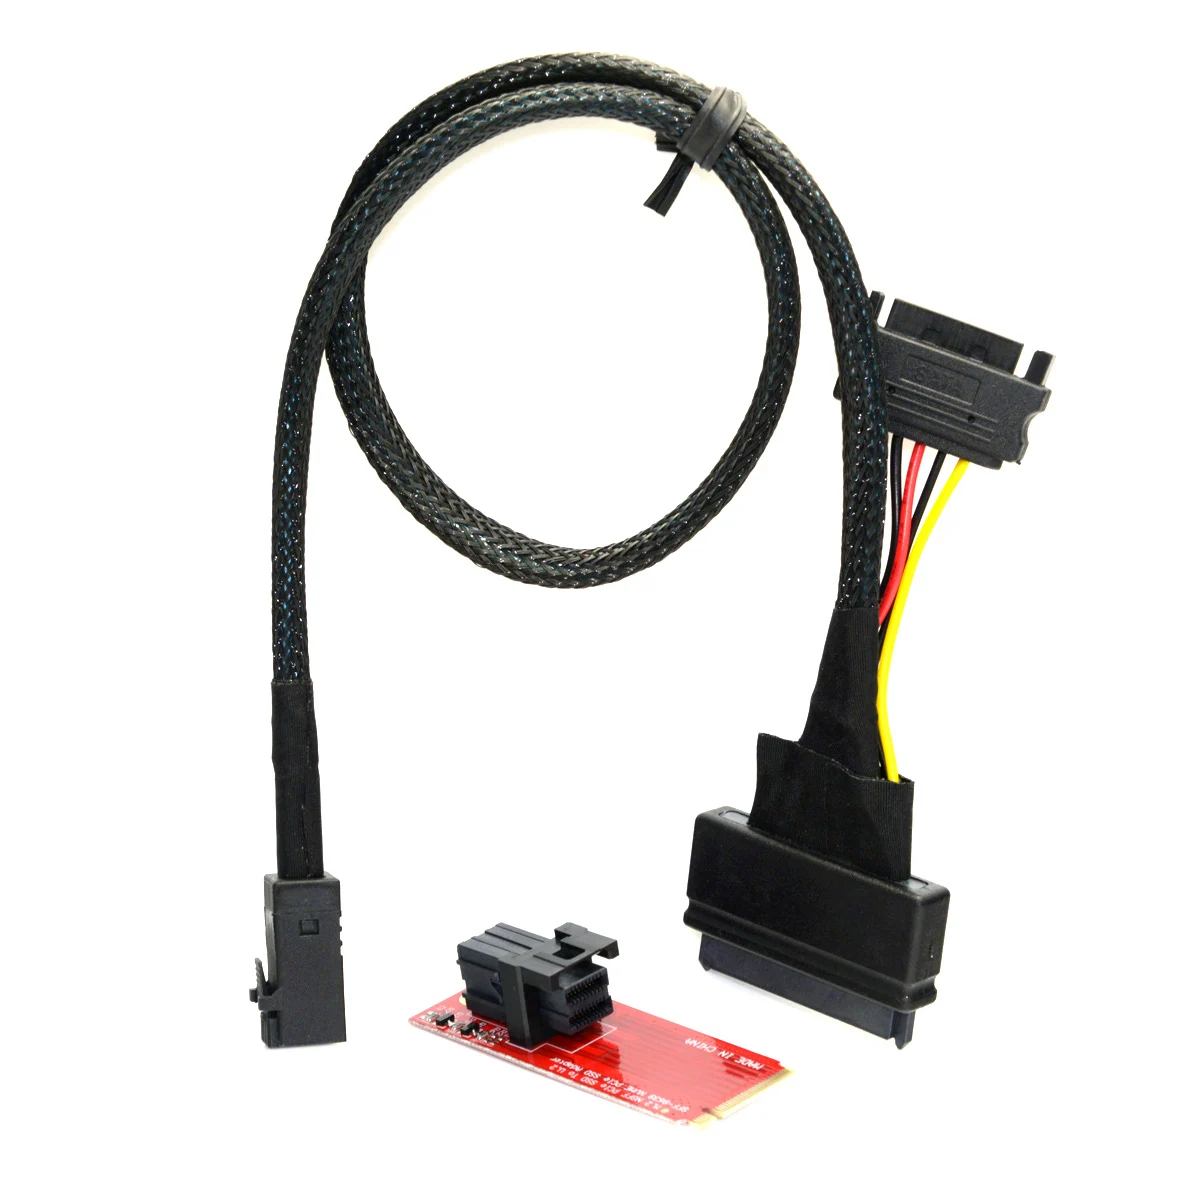 

Zihan CY U.2 U2 Kit SFF-8639 NVME PCIe SSD Adapter & Cable for Mainboard Intel SSD 750 p3600 p3700 M.2 SFF-8643